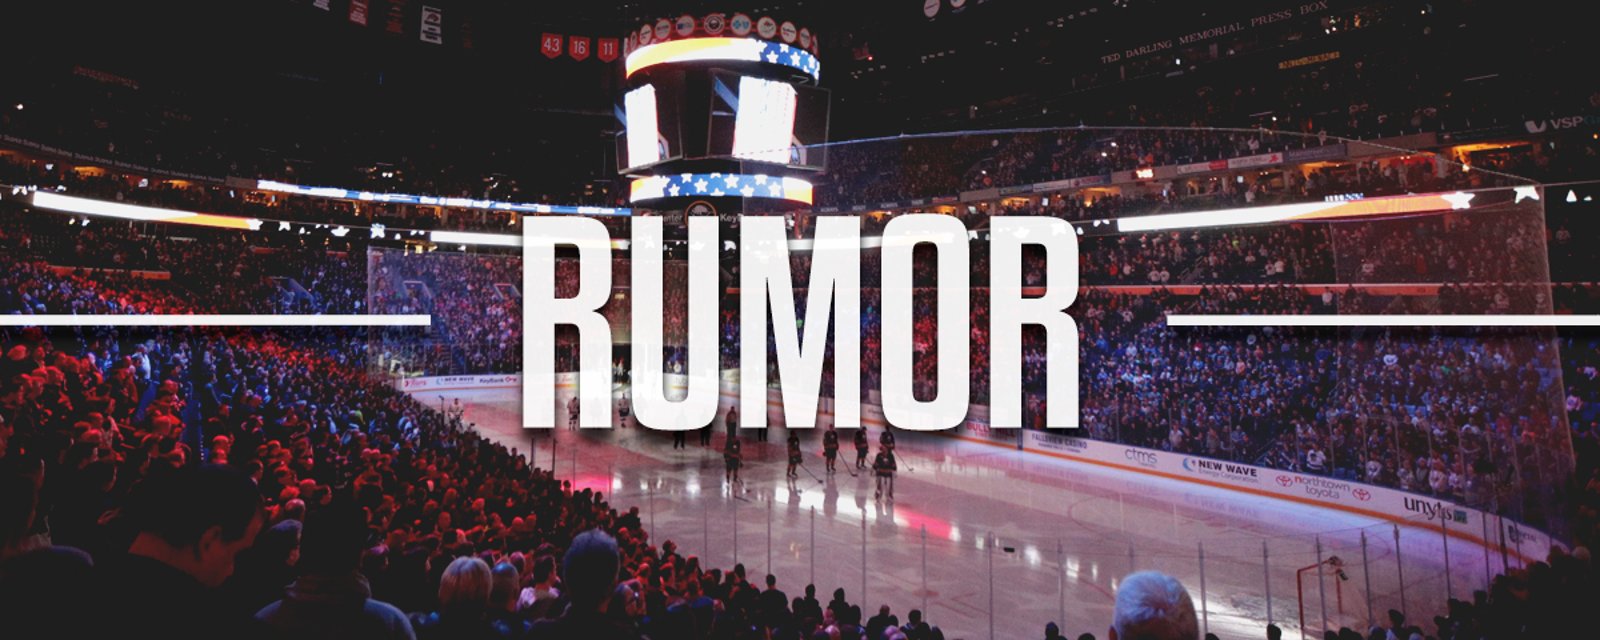 RUMOR: SUPERSTAR player would reportedly refuse contract extension if coach stays.